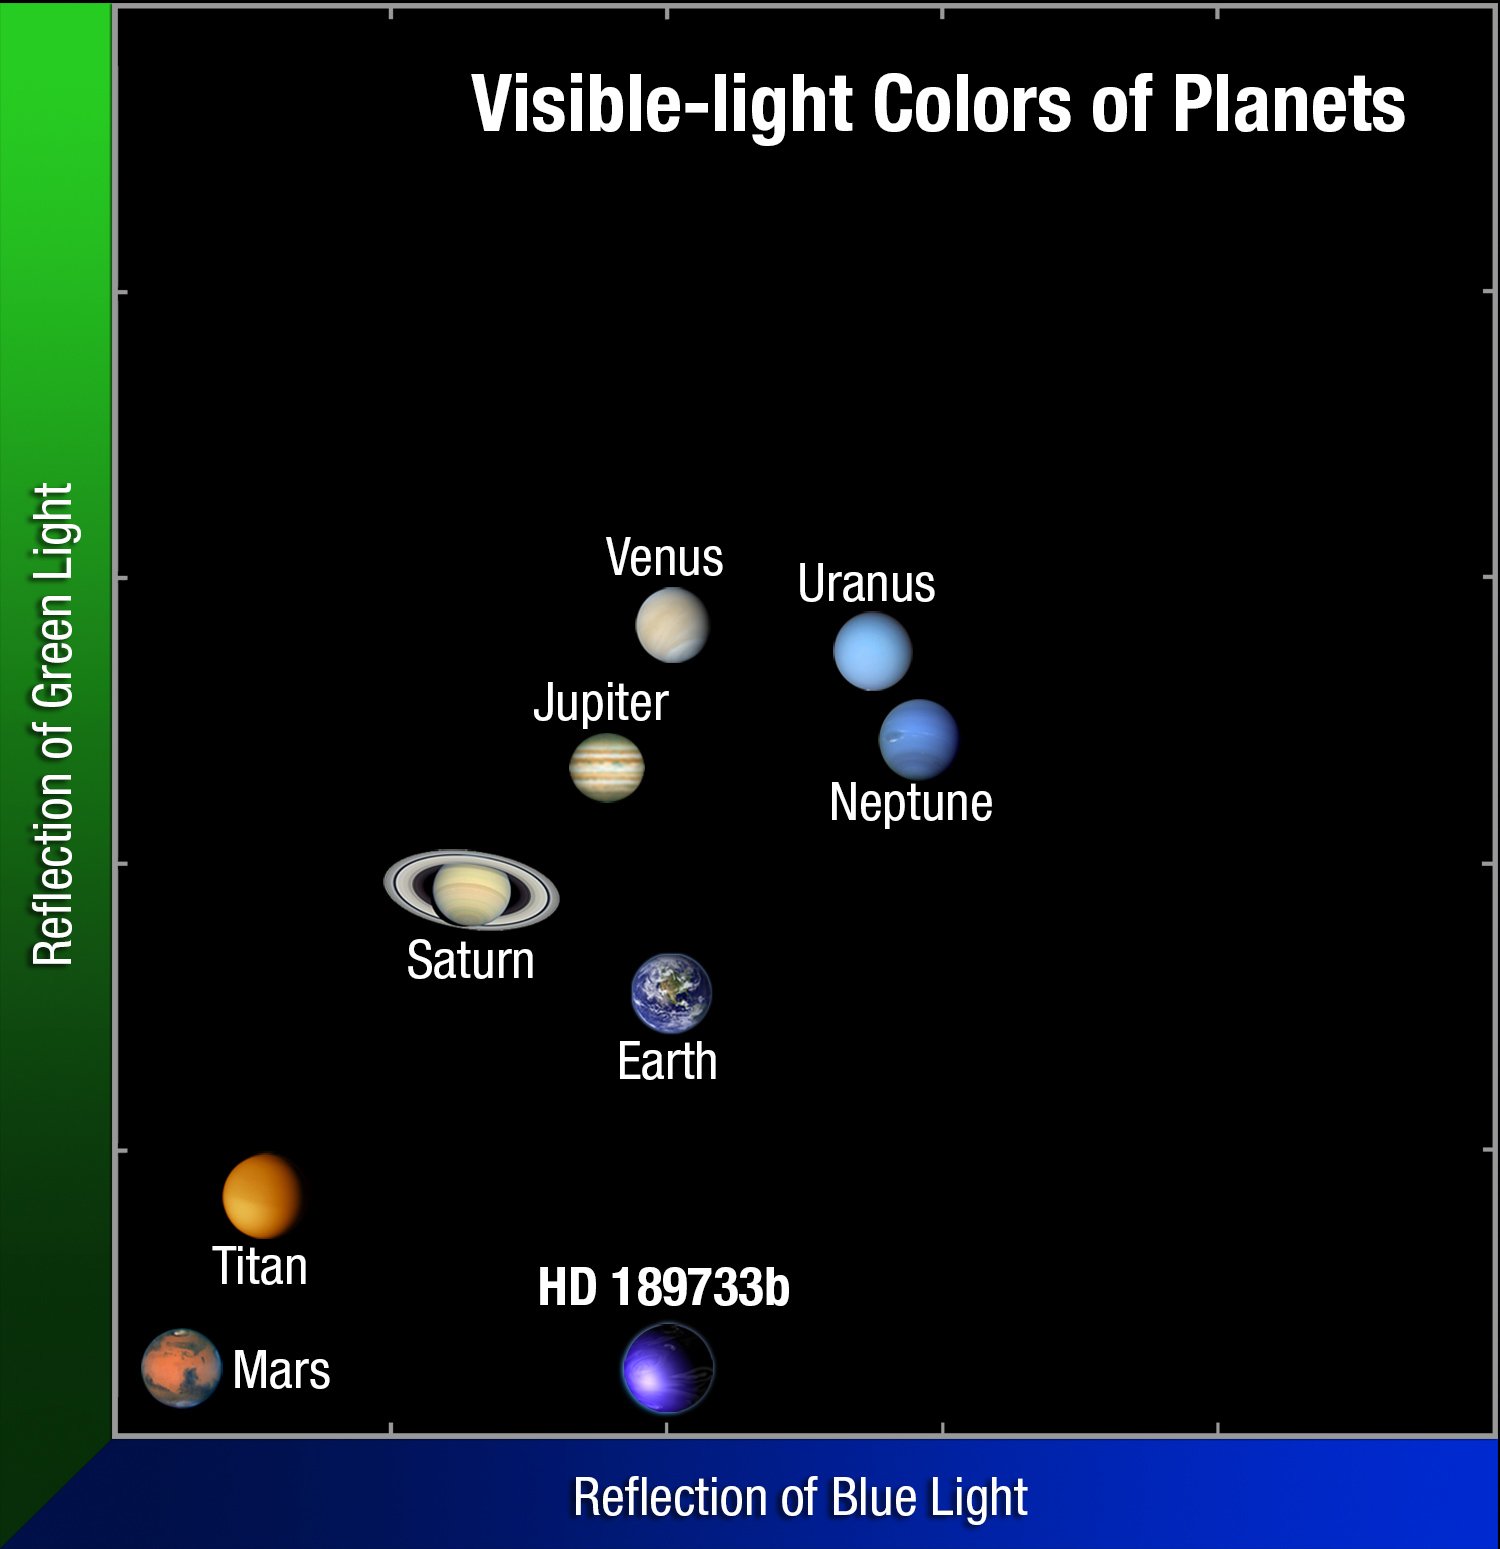 Visible-light Color of Planets Plot